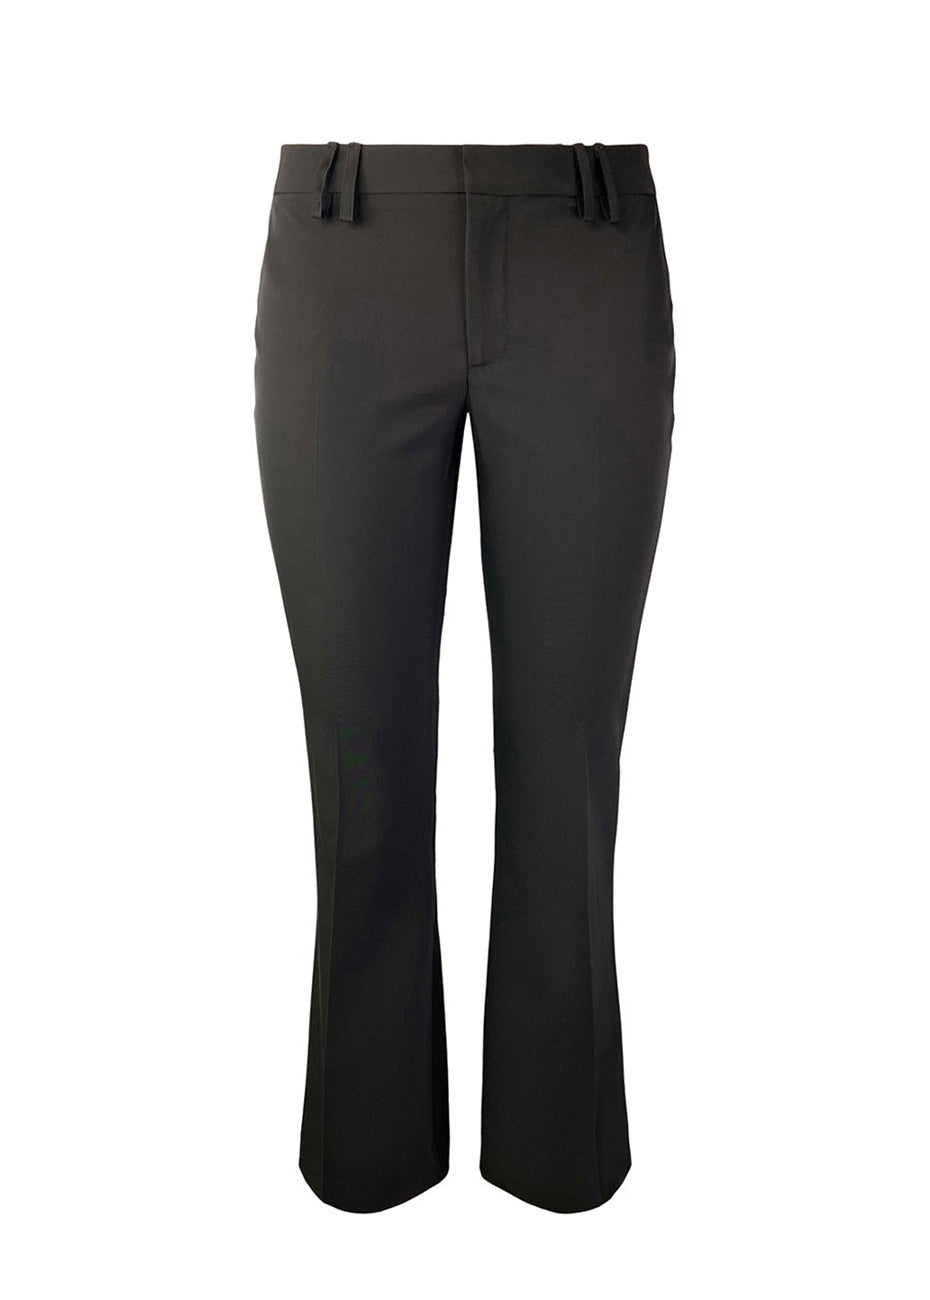 Flared stretch trousers - Black - Ladies